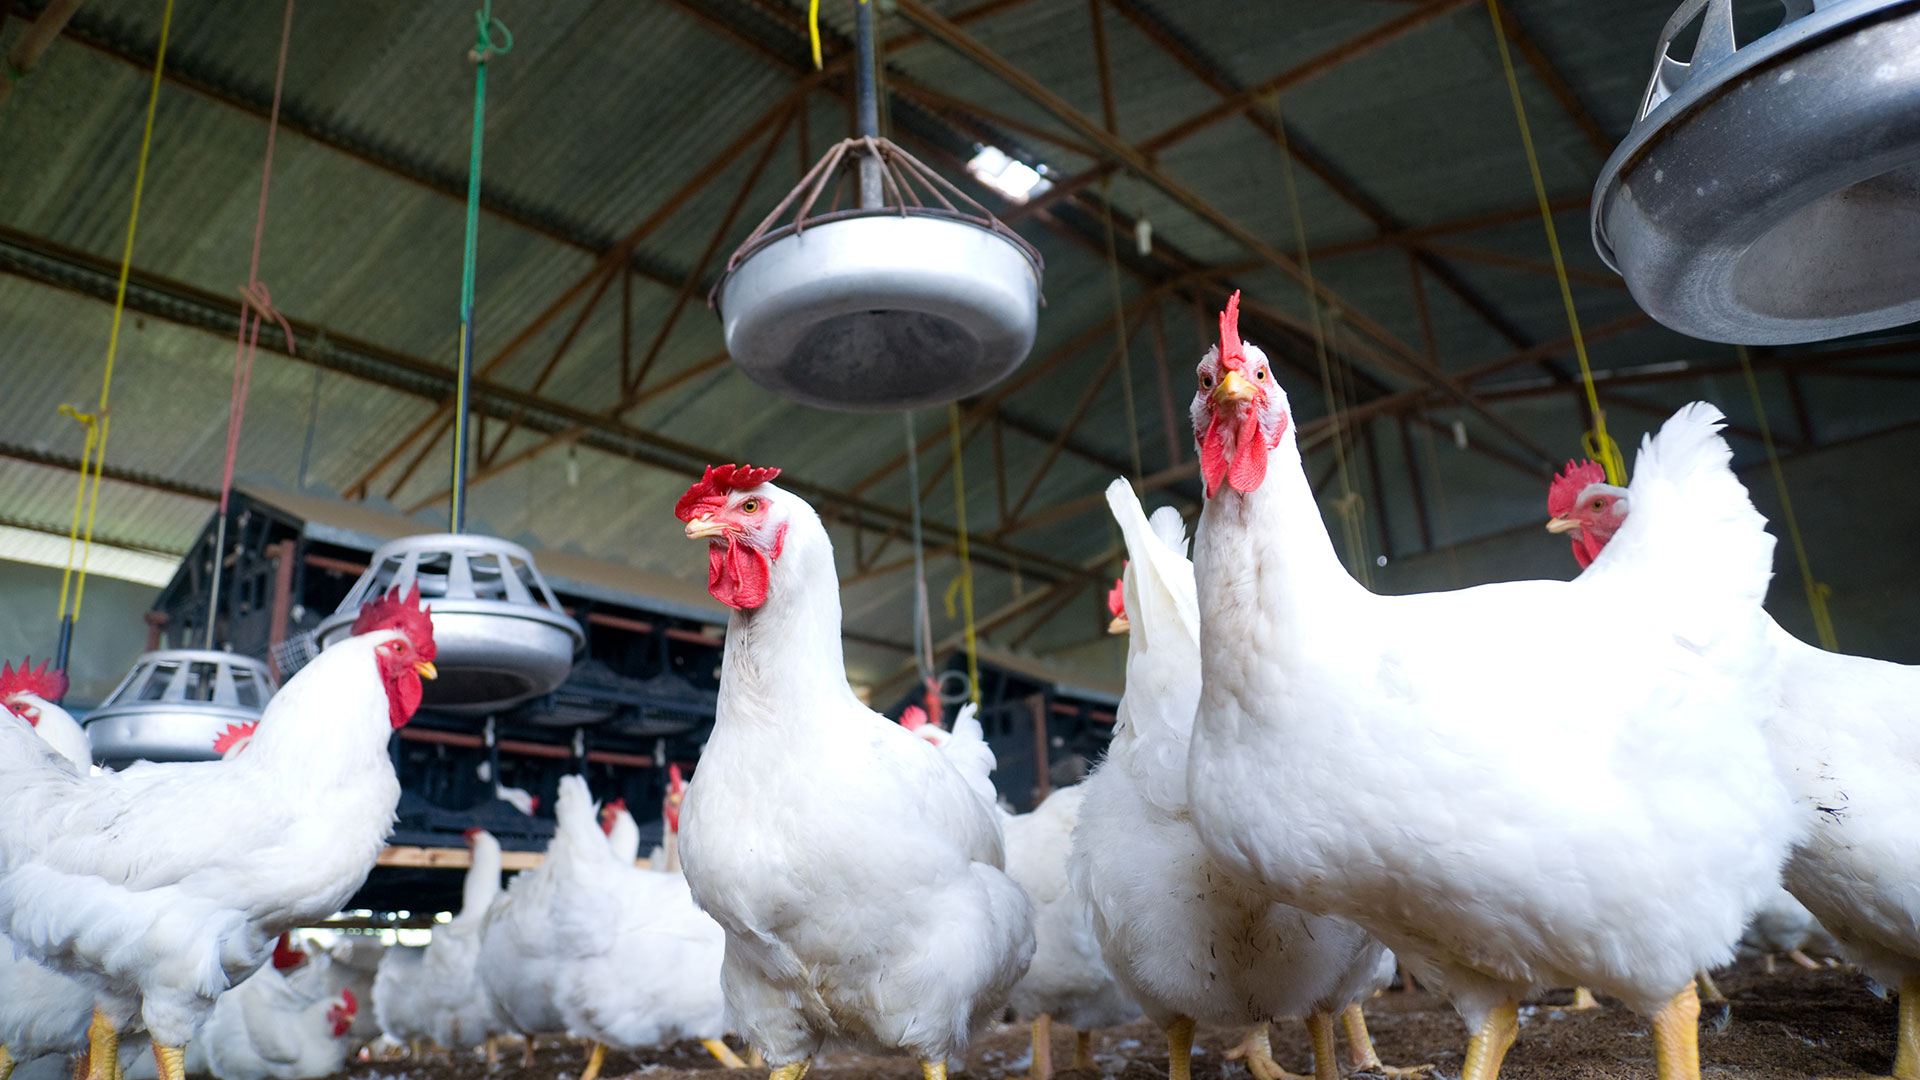 The Government ordered new measures to stop the spread of bird flu